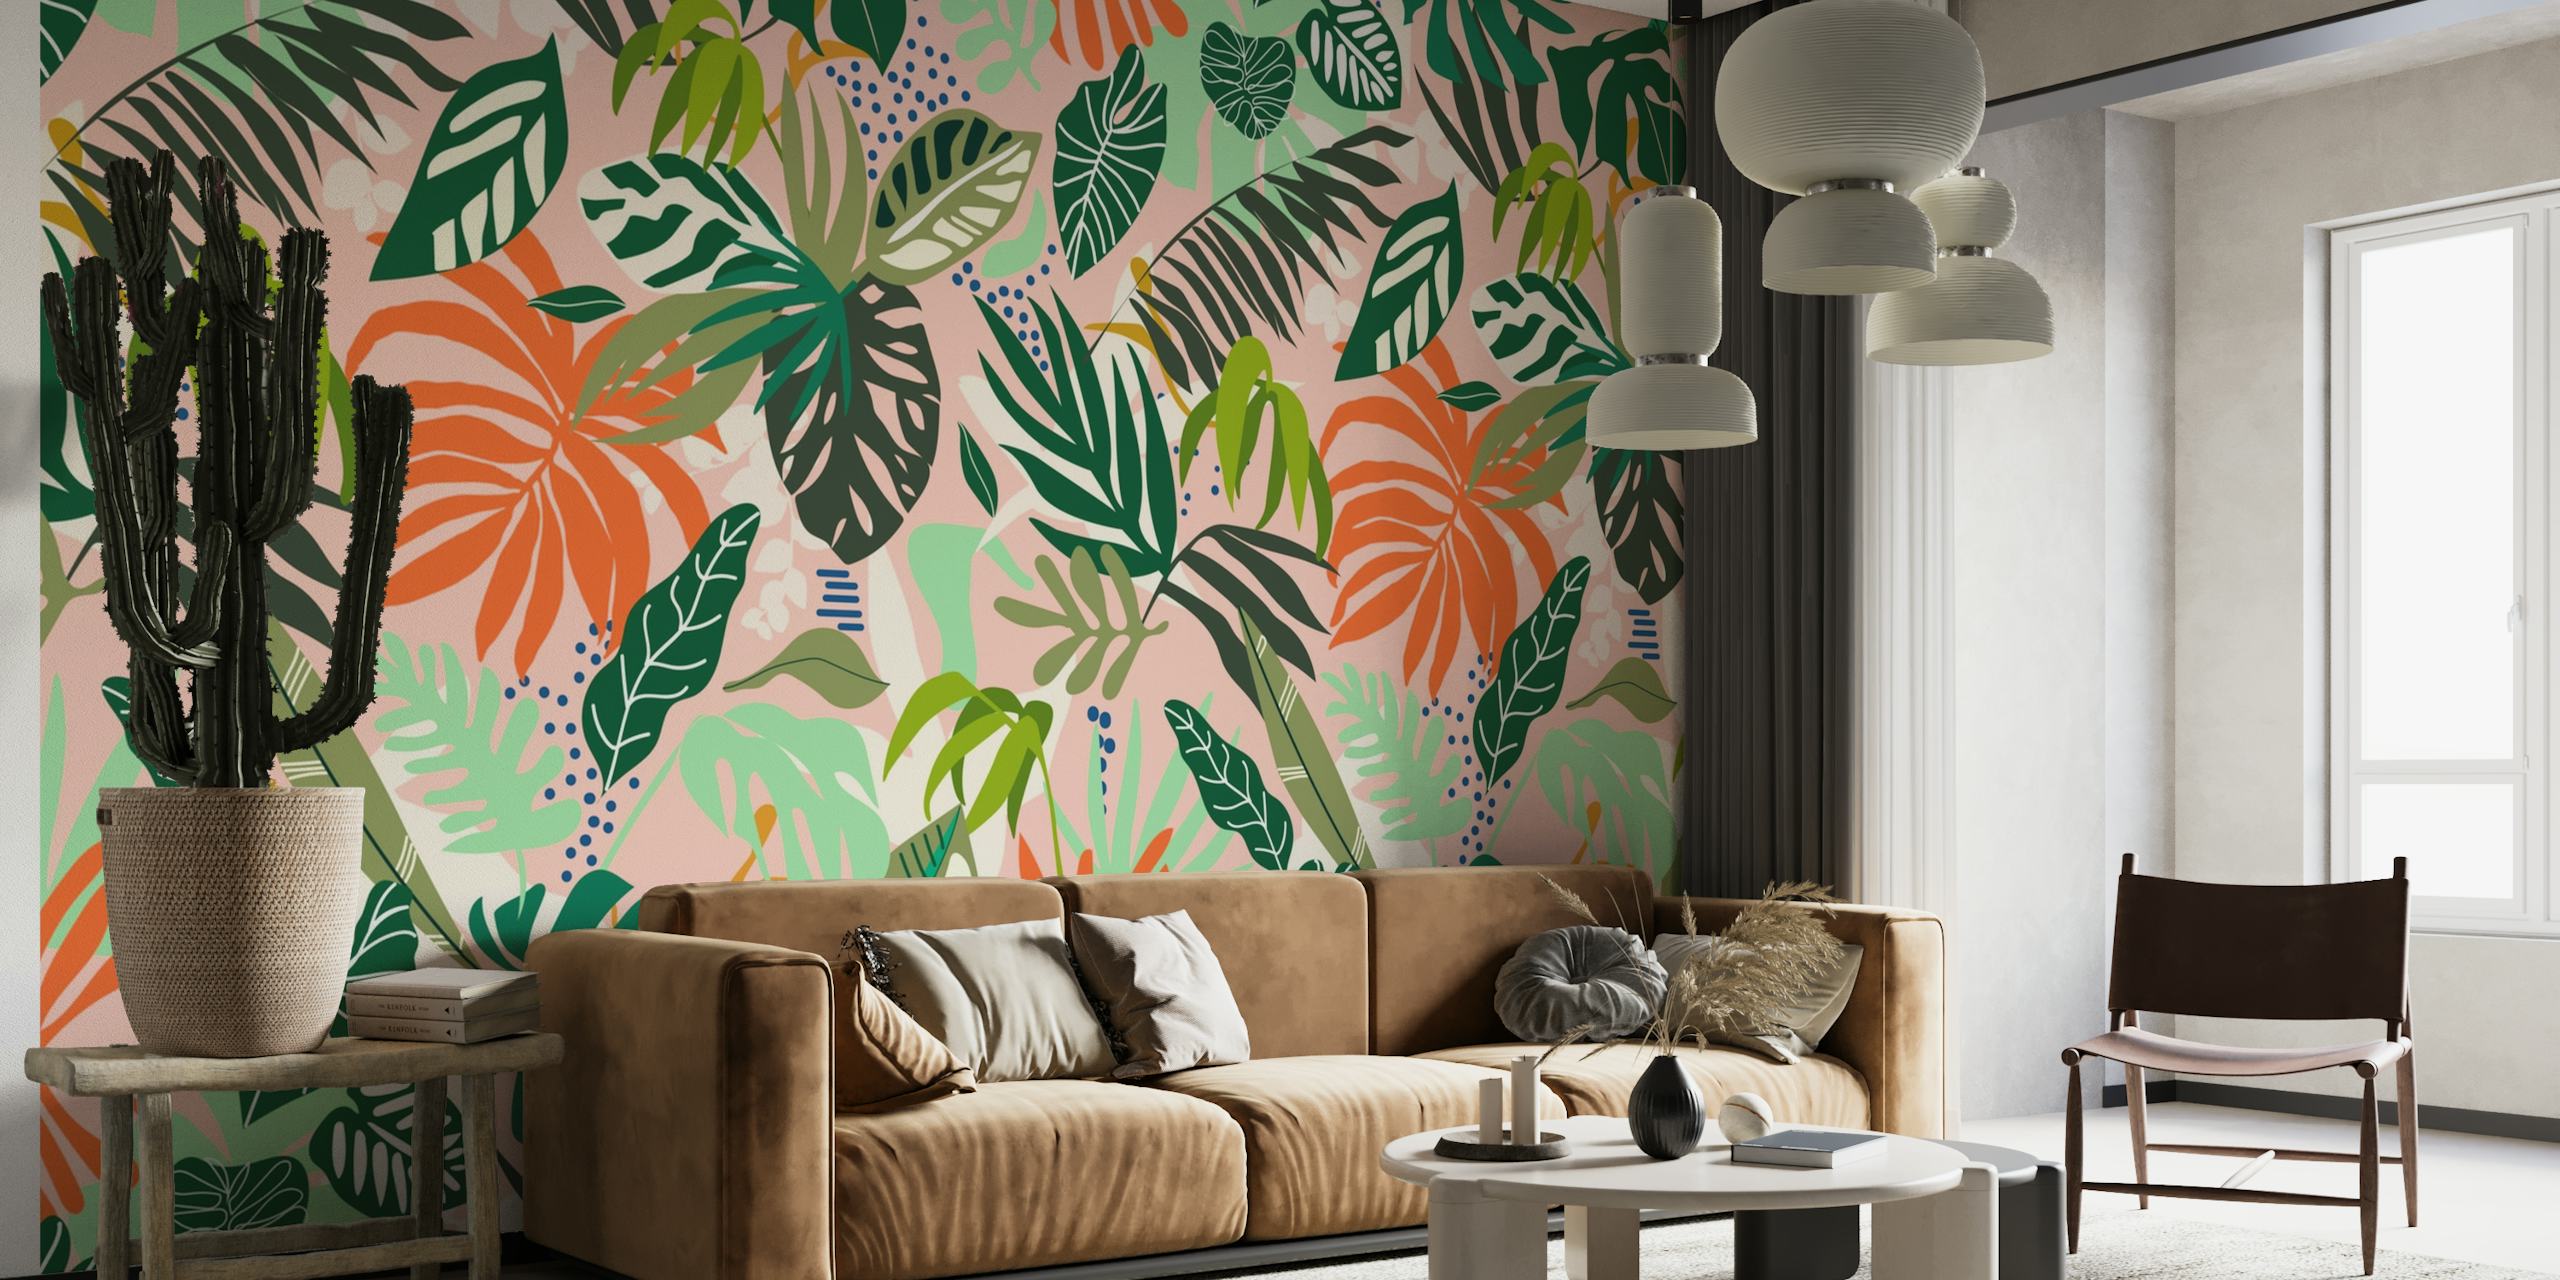 Simple graphic jungle pattern tapete